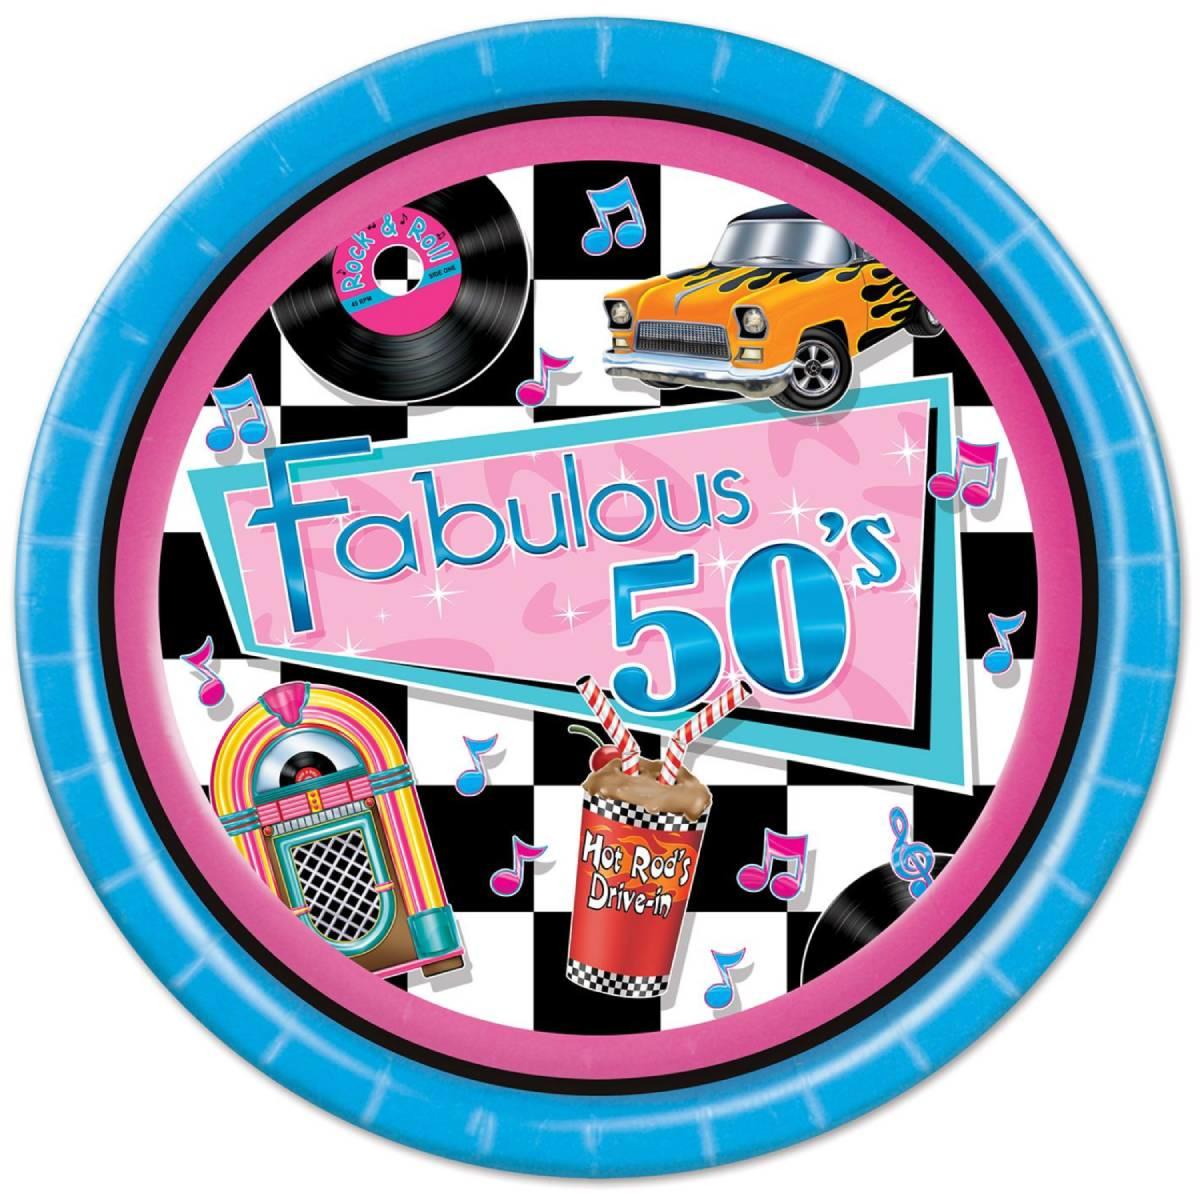 Fabulous 50s Paper Party Plates pk8 by Beistle 58035 available here at Karnival Costumes online party shop